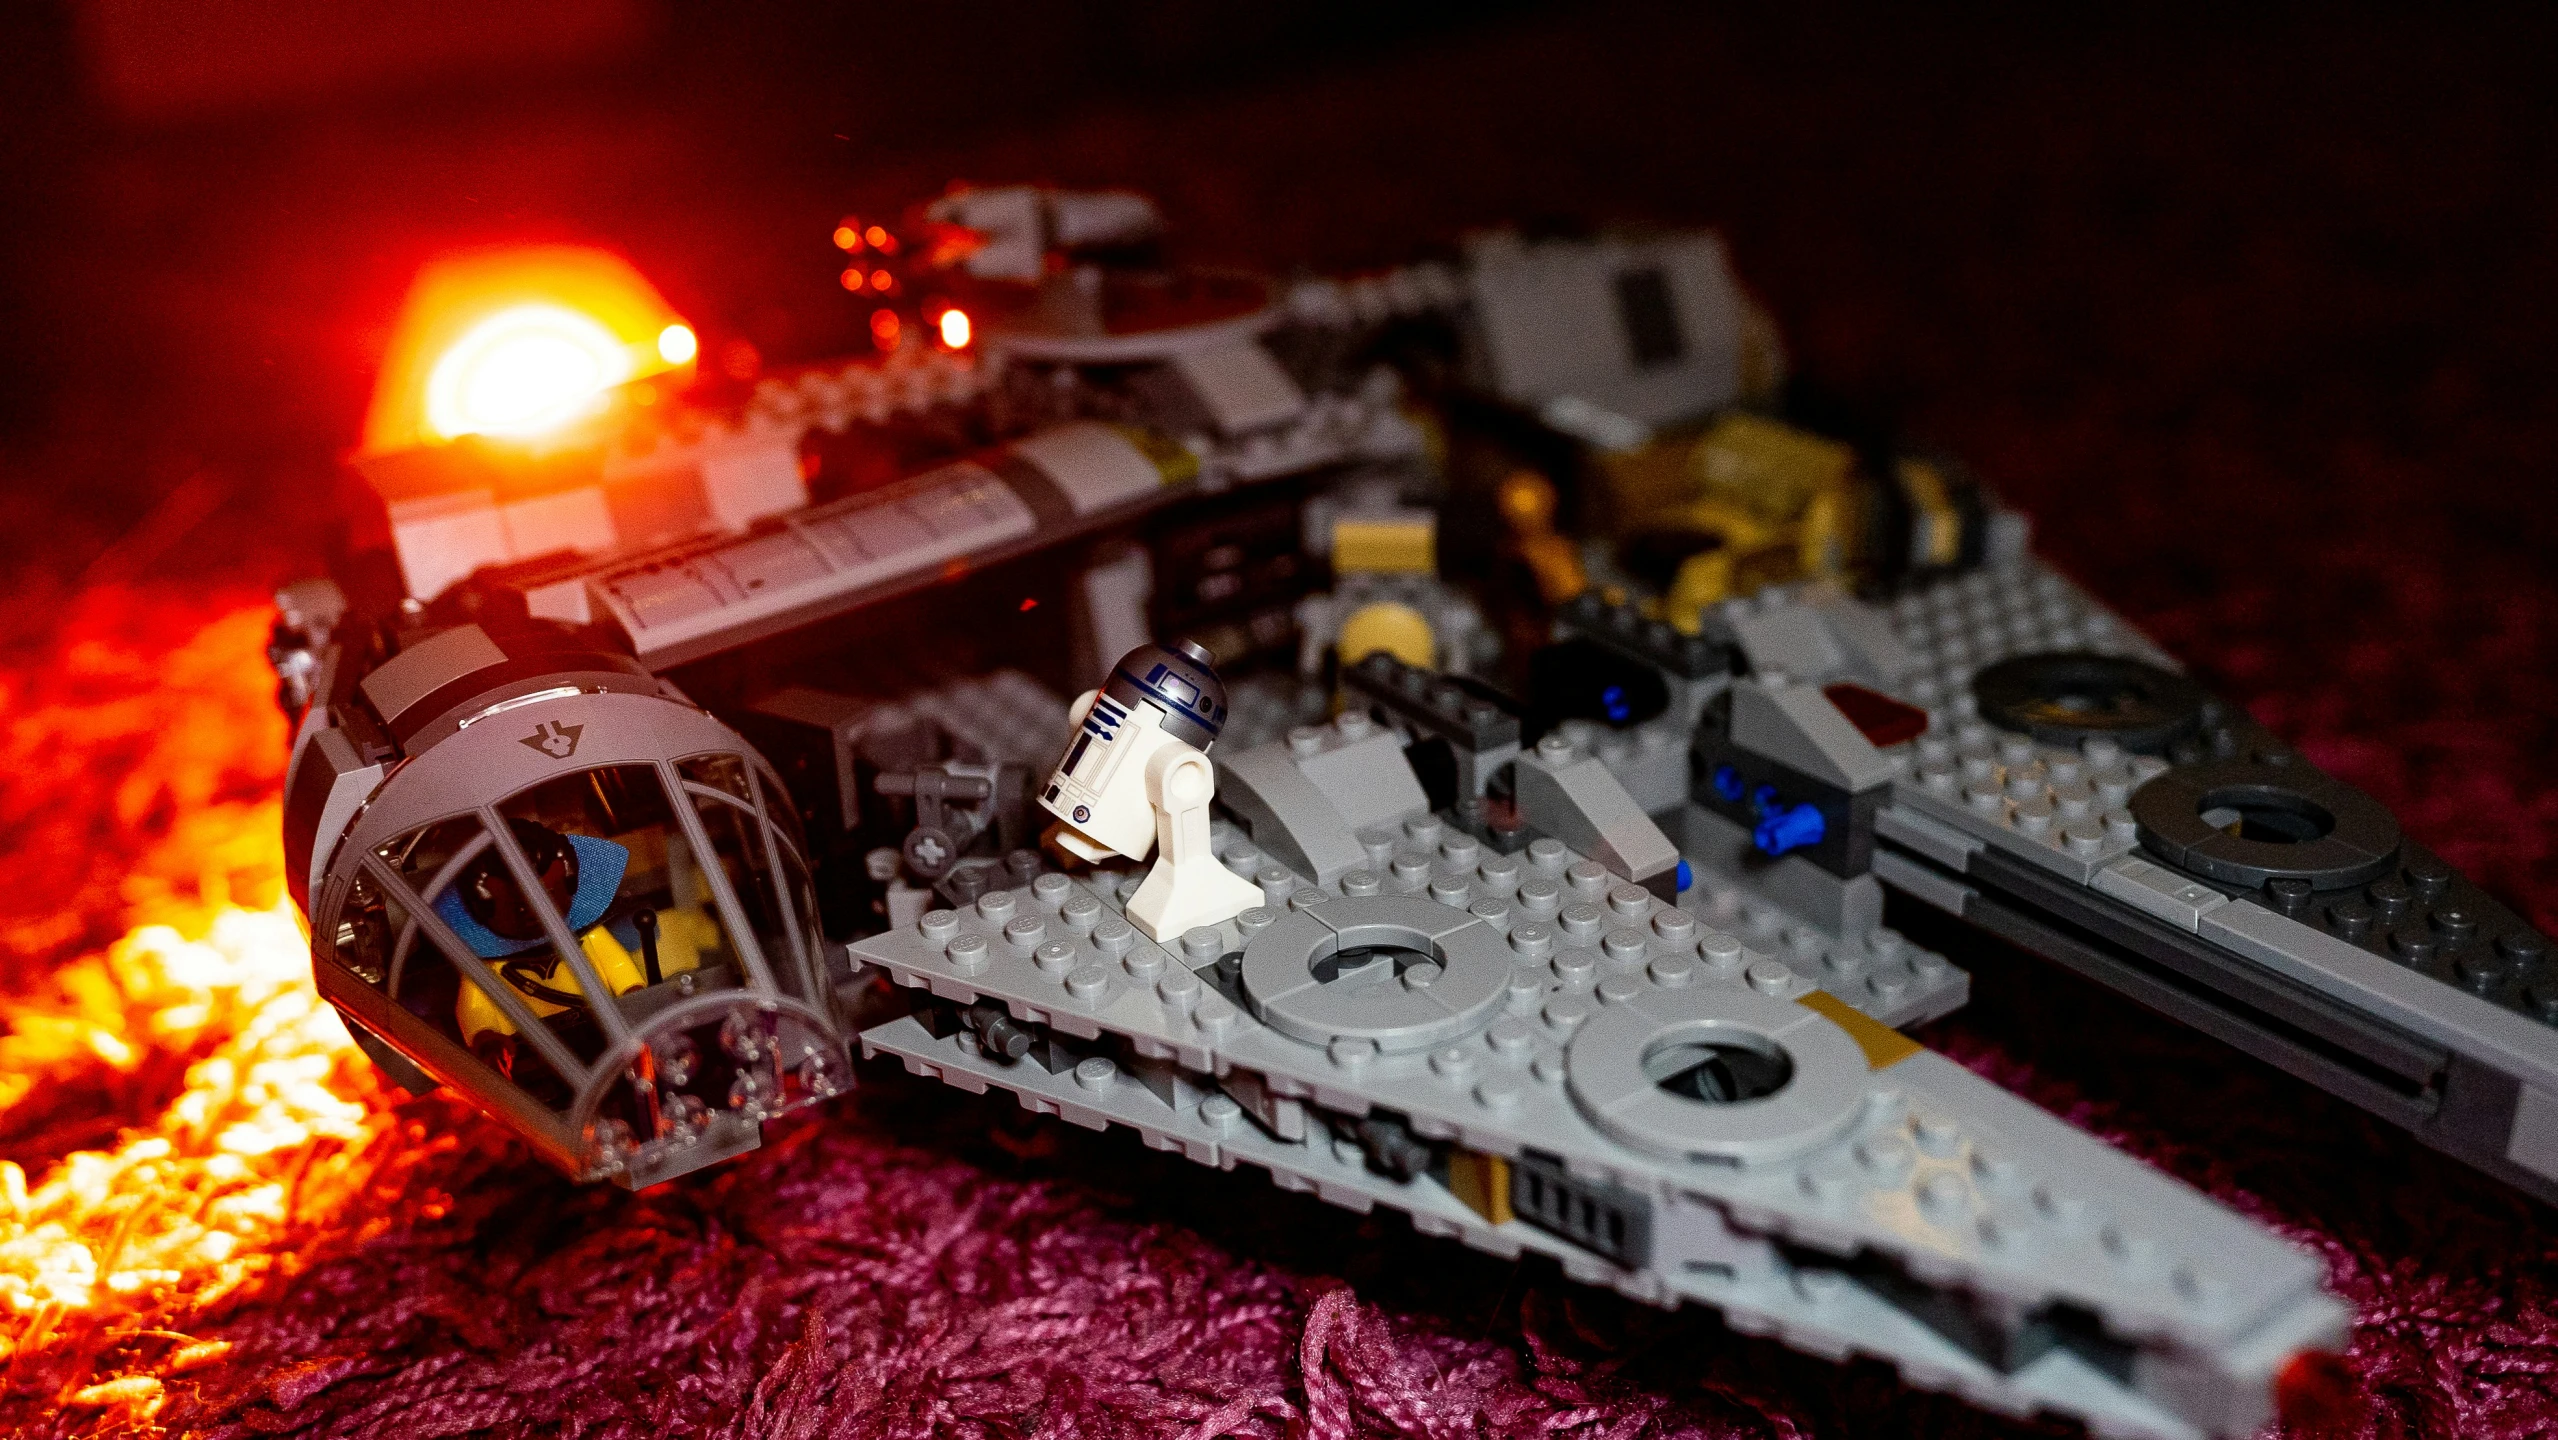 lego star wars imperial cruiser model burning on the ground